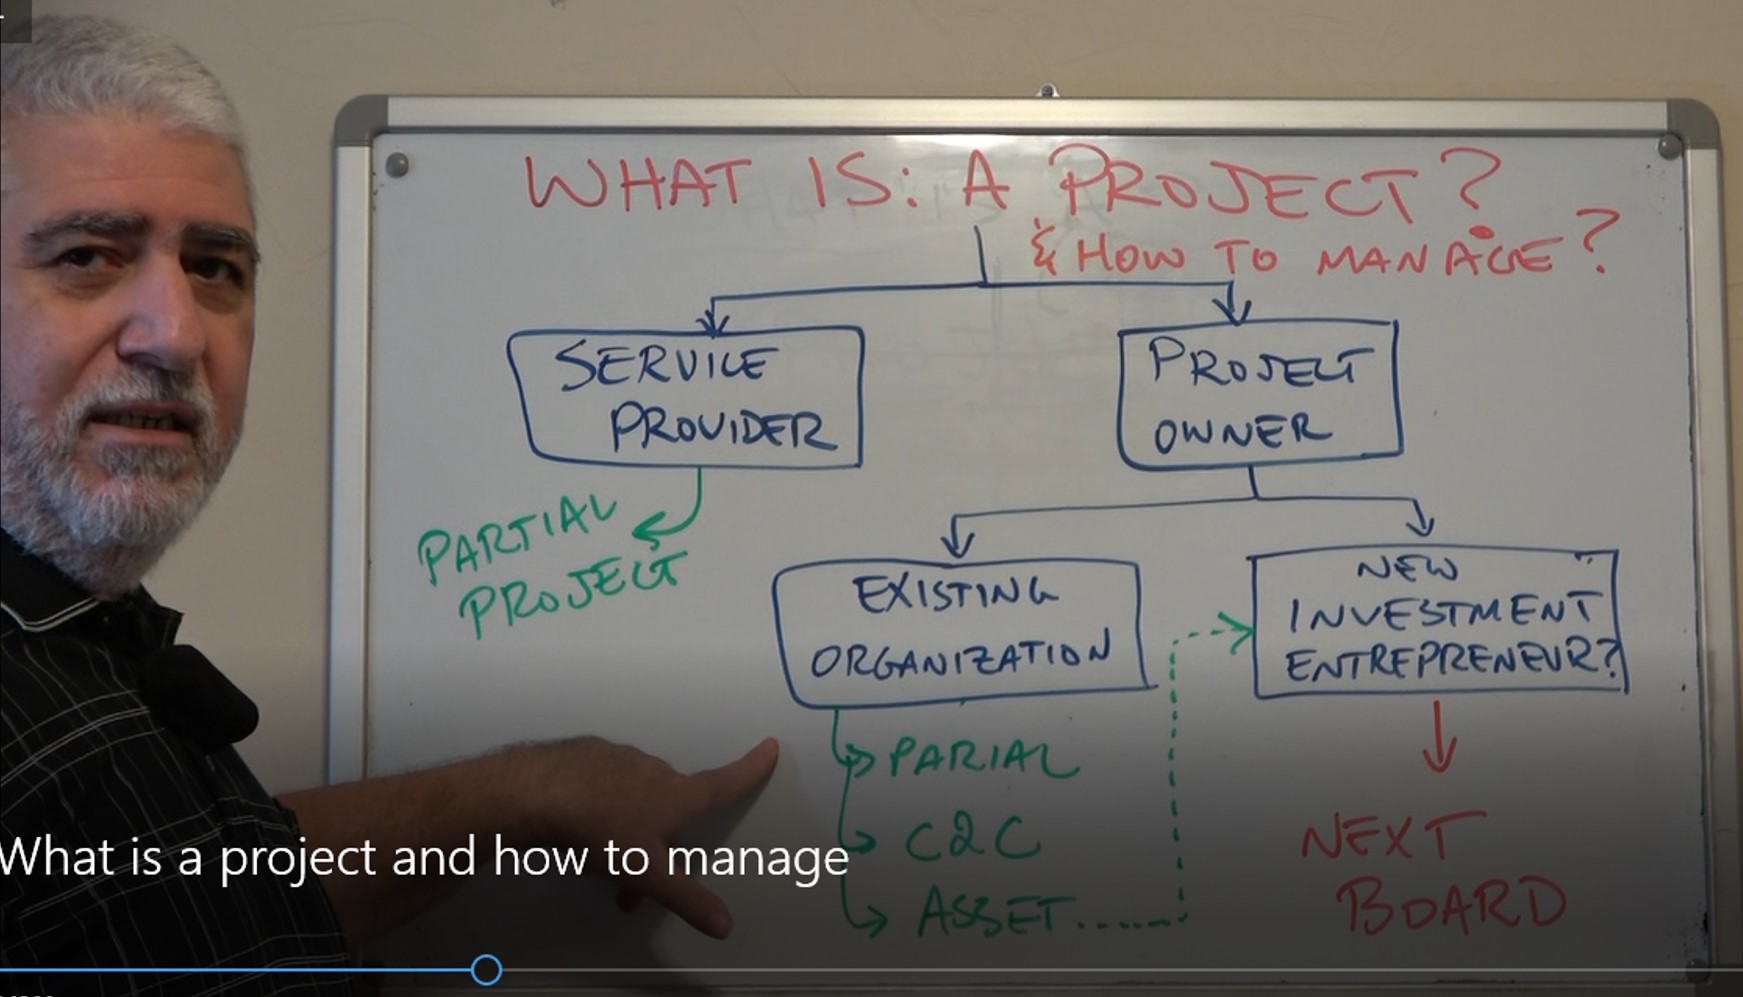 What is a project and how to manage or lead one? | what does the term project mean?